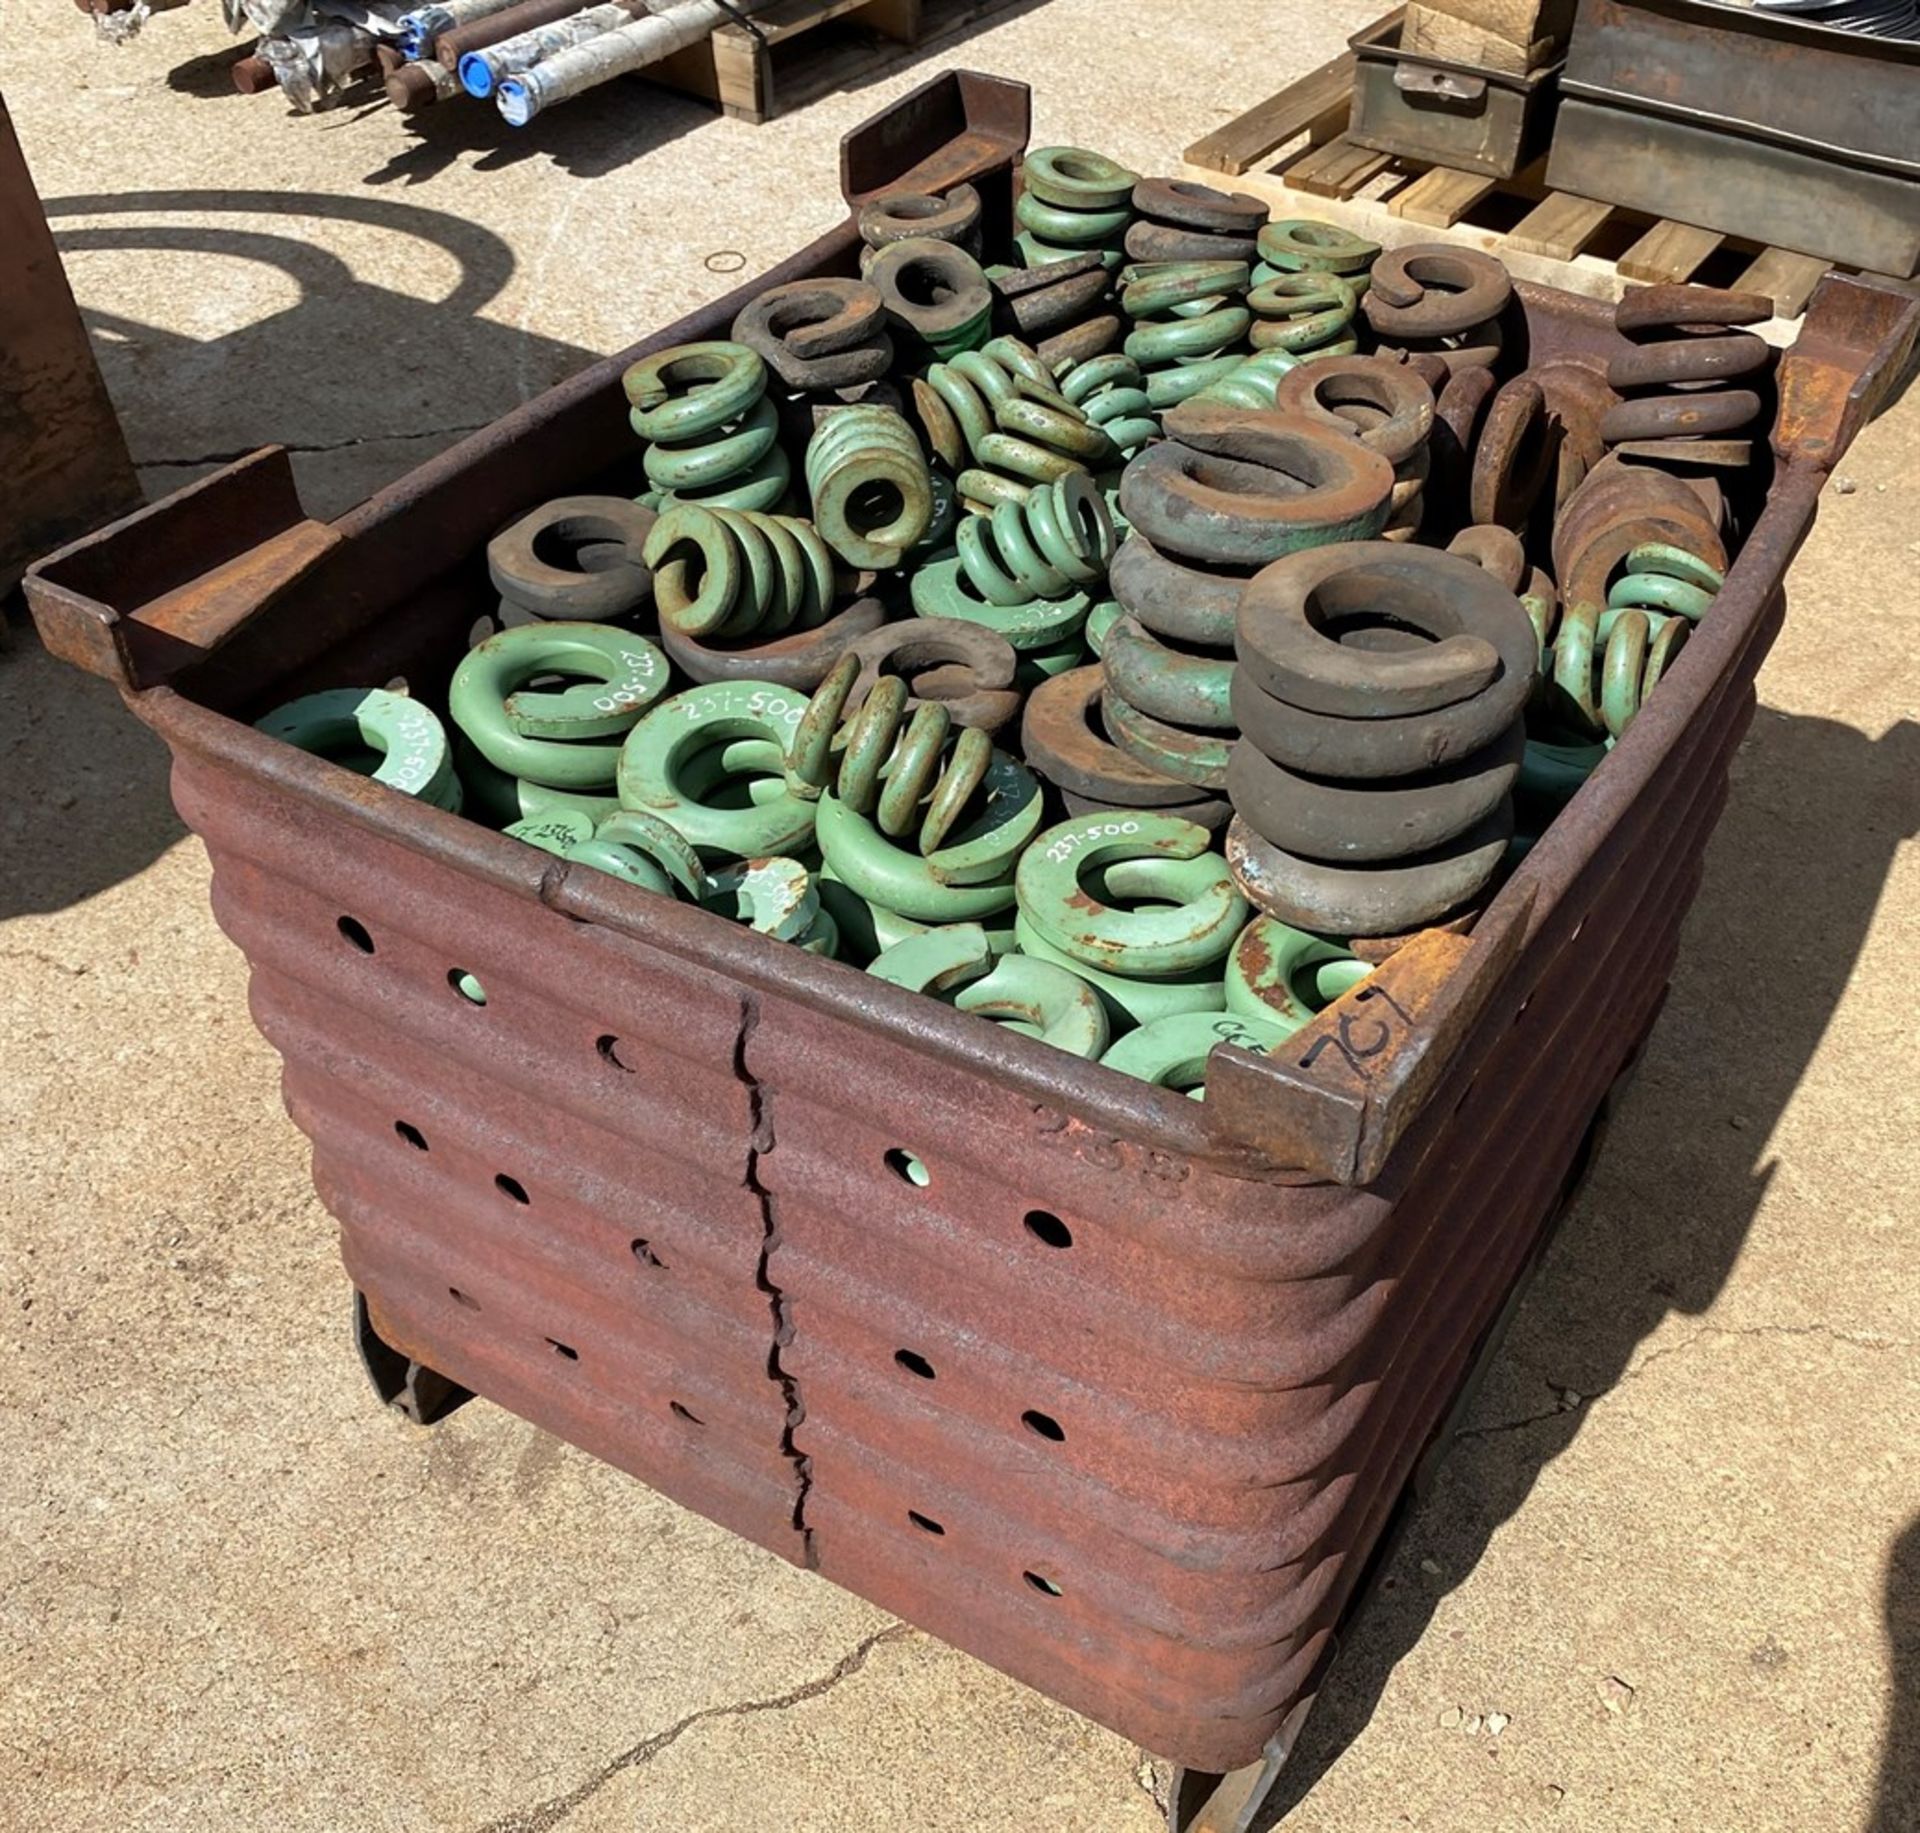 Steel Tub w/ Large Assortment of Springs